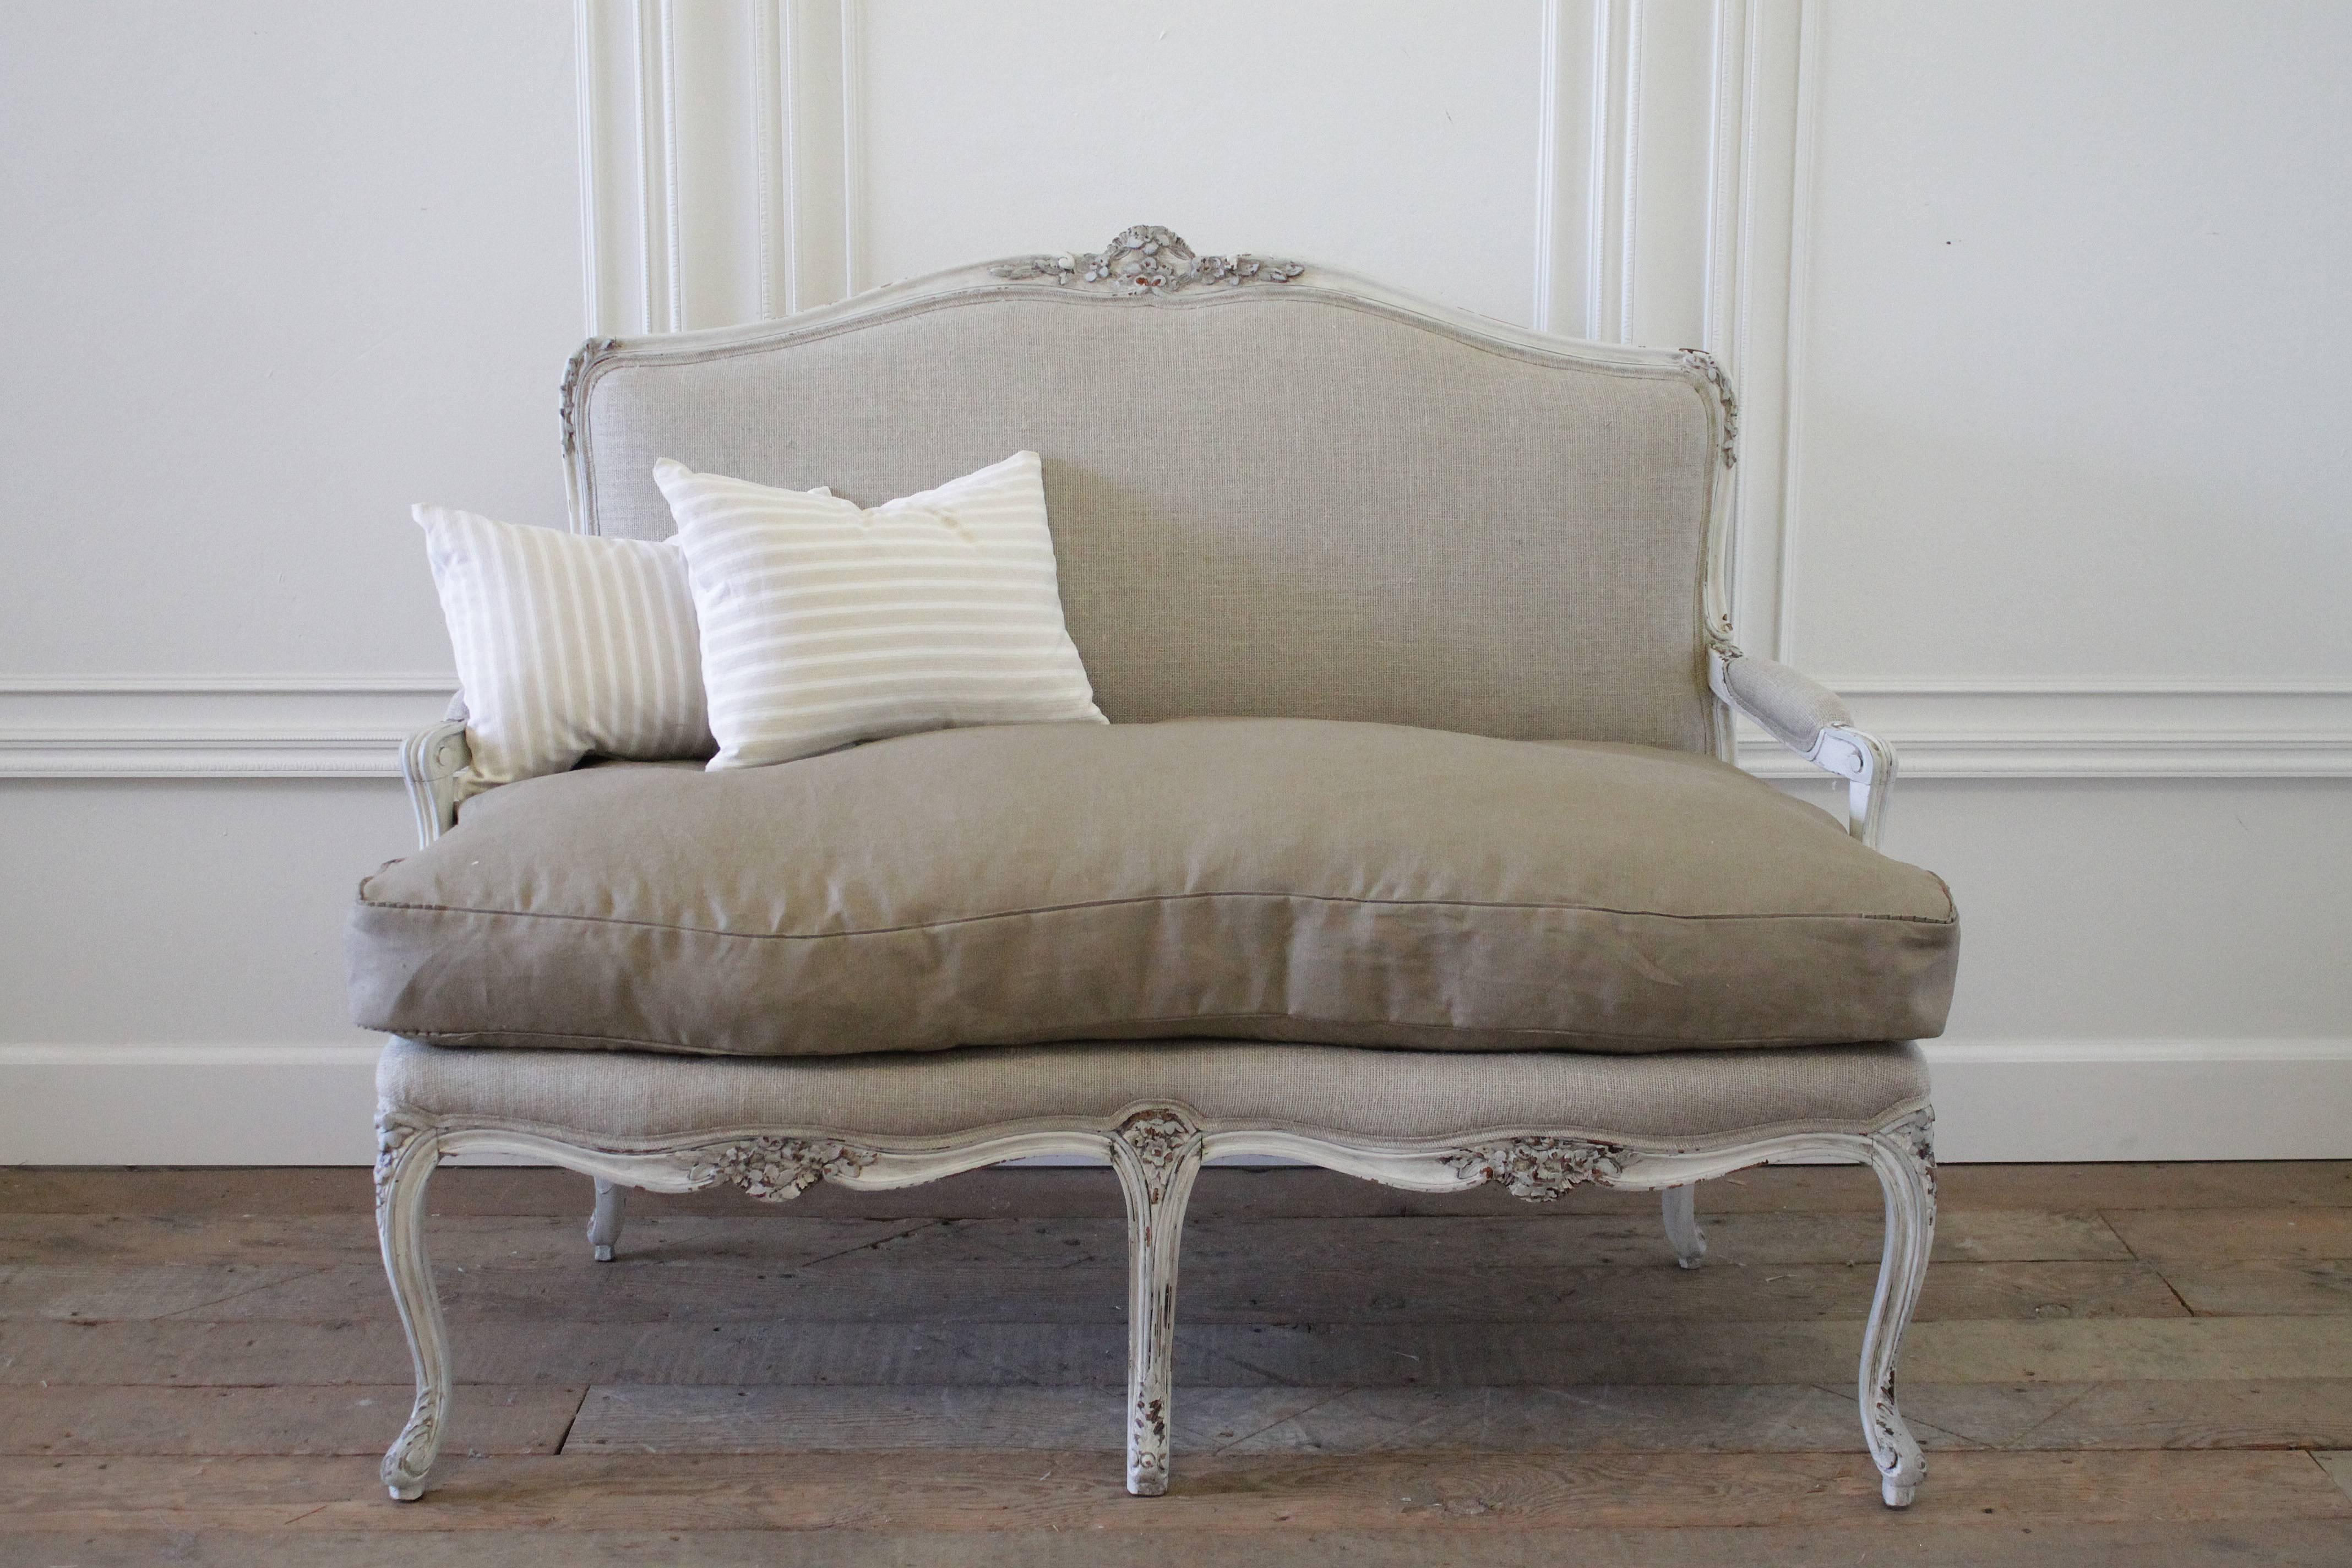 Fabulous Louis XV style carved country French settee in our soft Irish nubby linen. We painted this walnut frame in a tone on tone French grey with darker accented carvings. The settee has a subtle distressed finish, with an antique glaze to give a